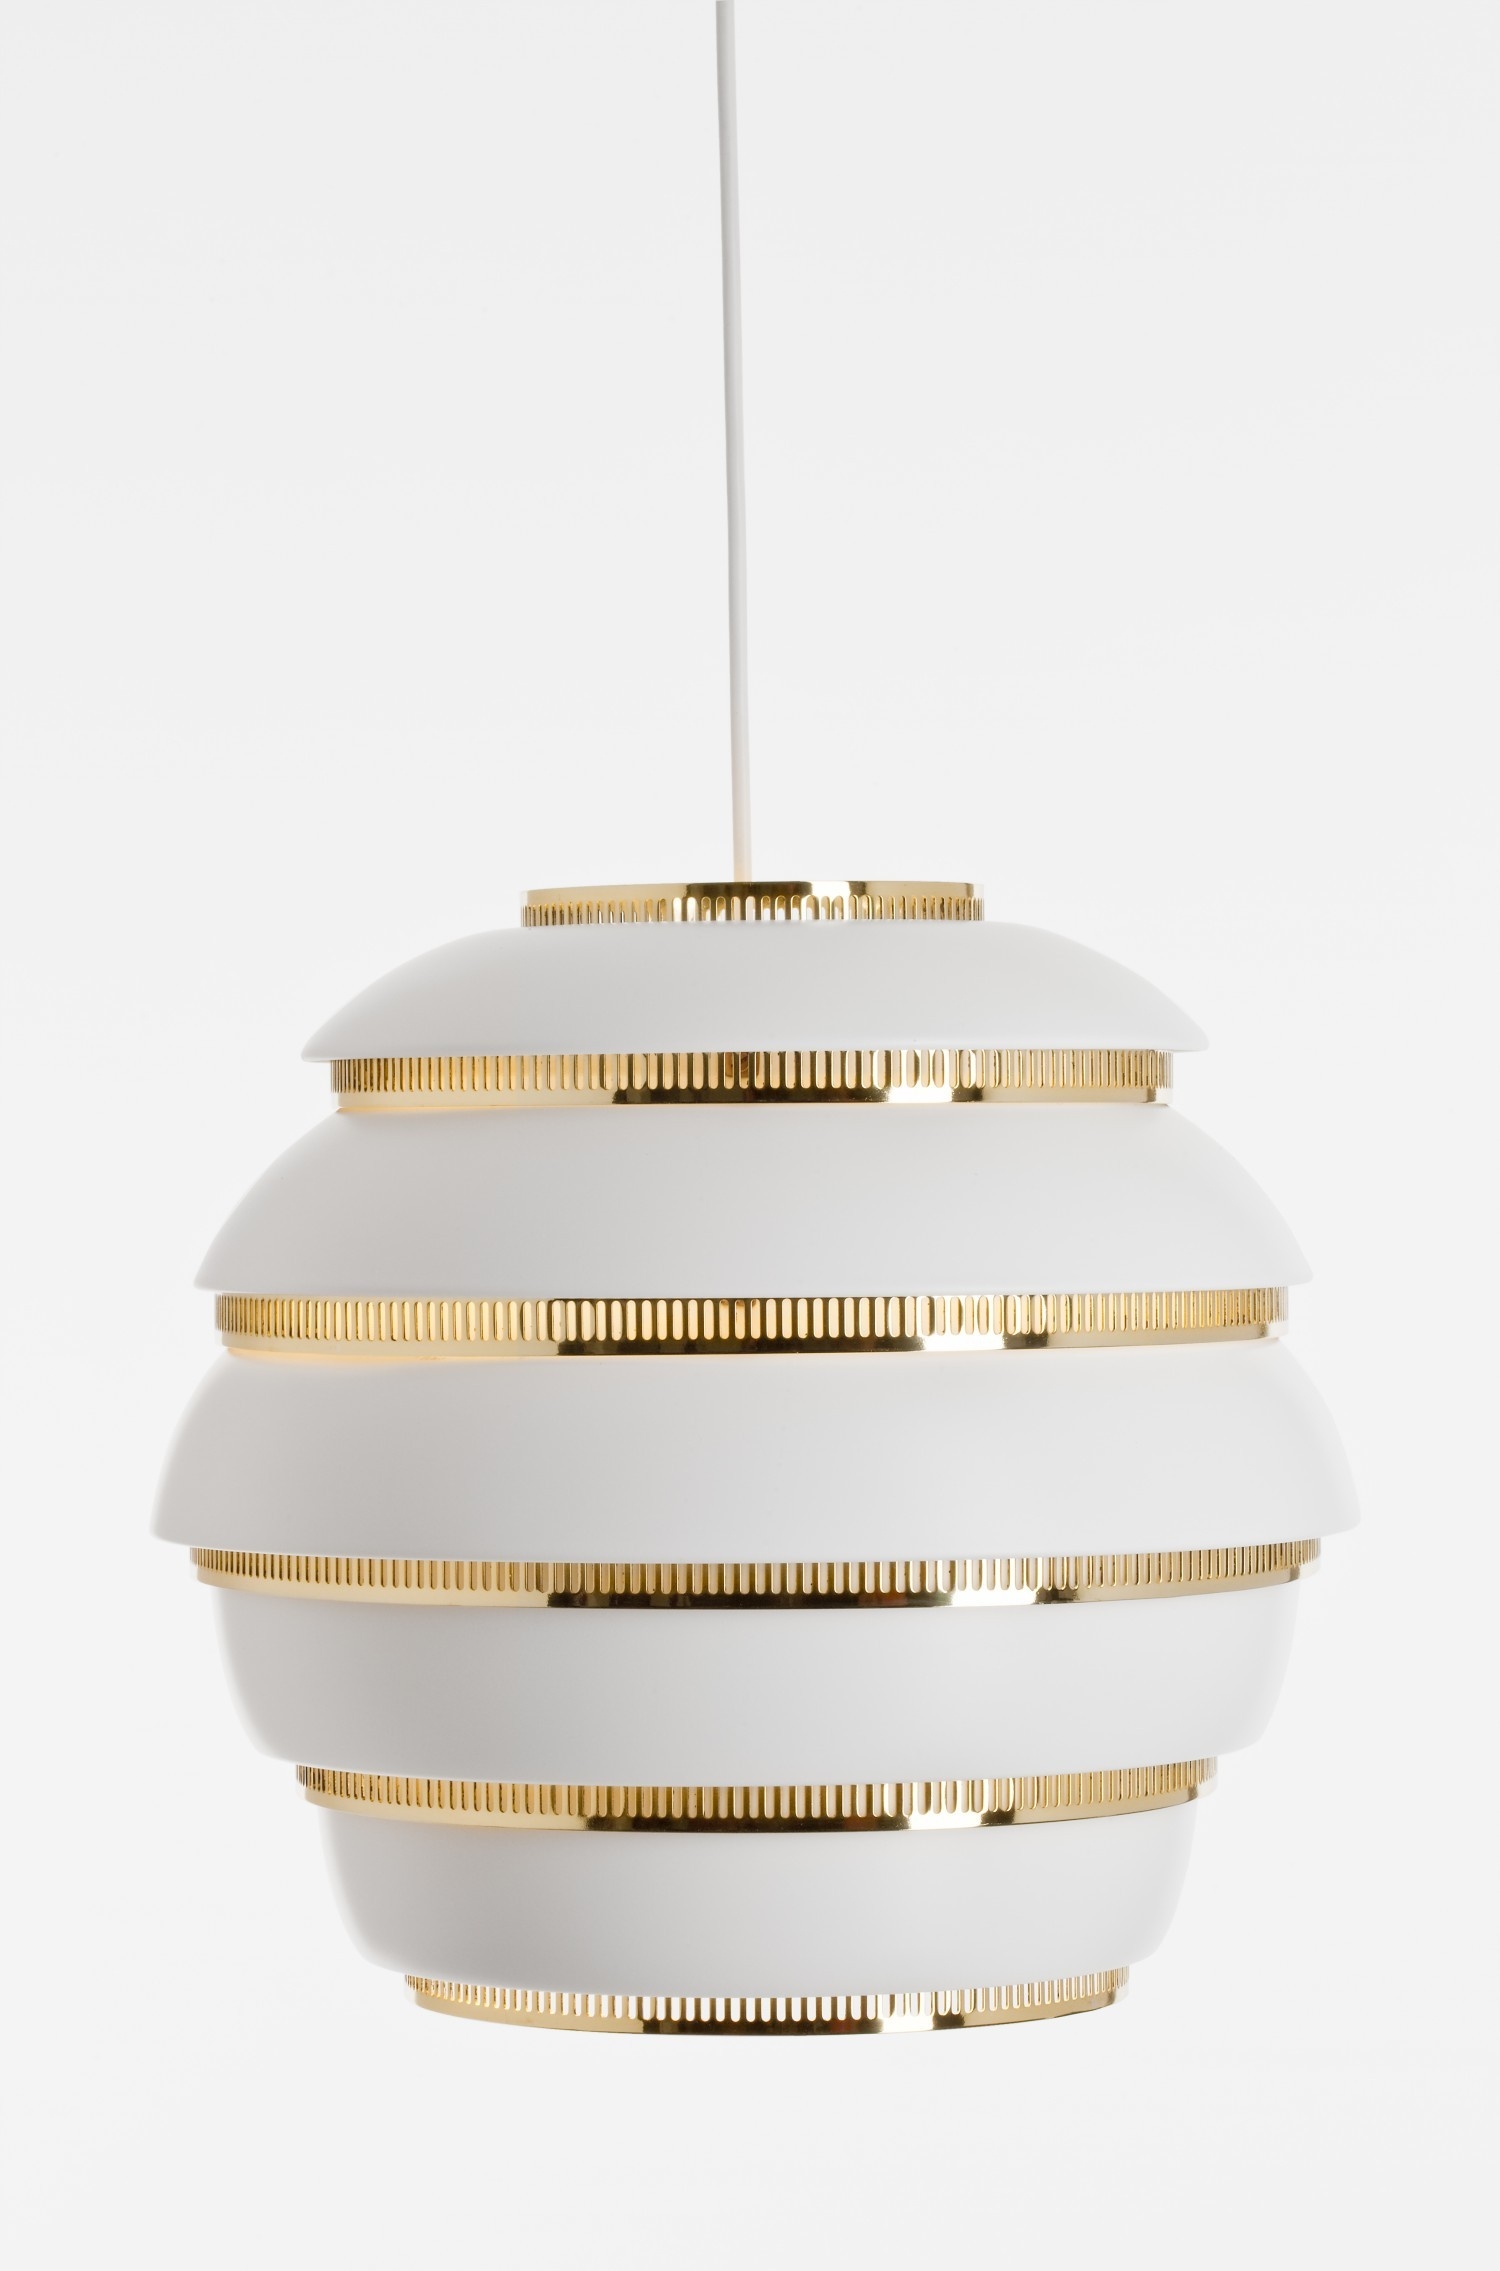 Artek lighting brass and white this is what i want